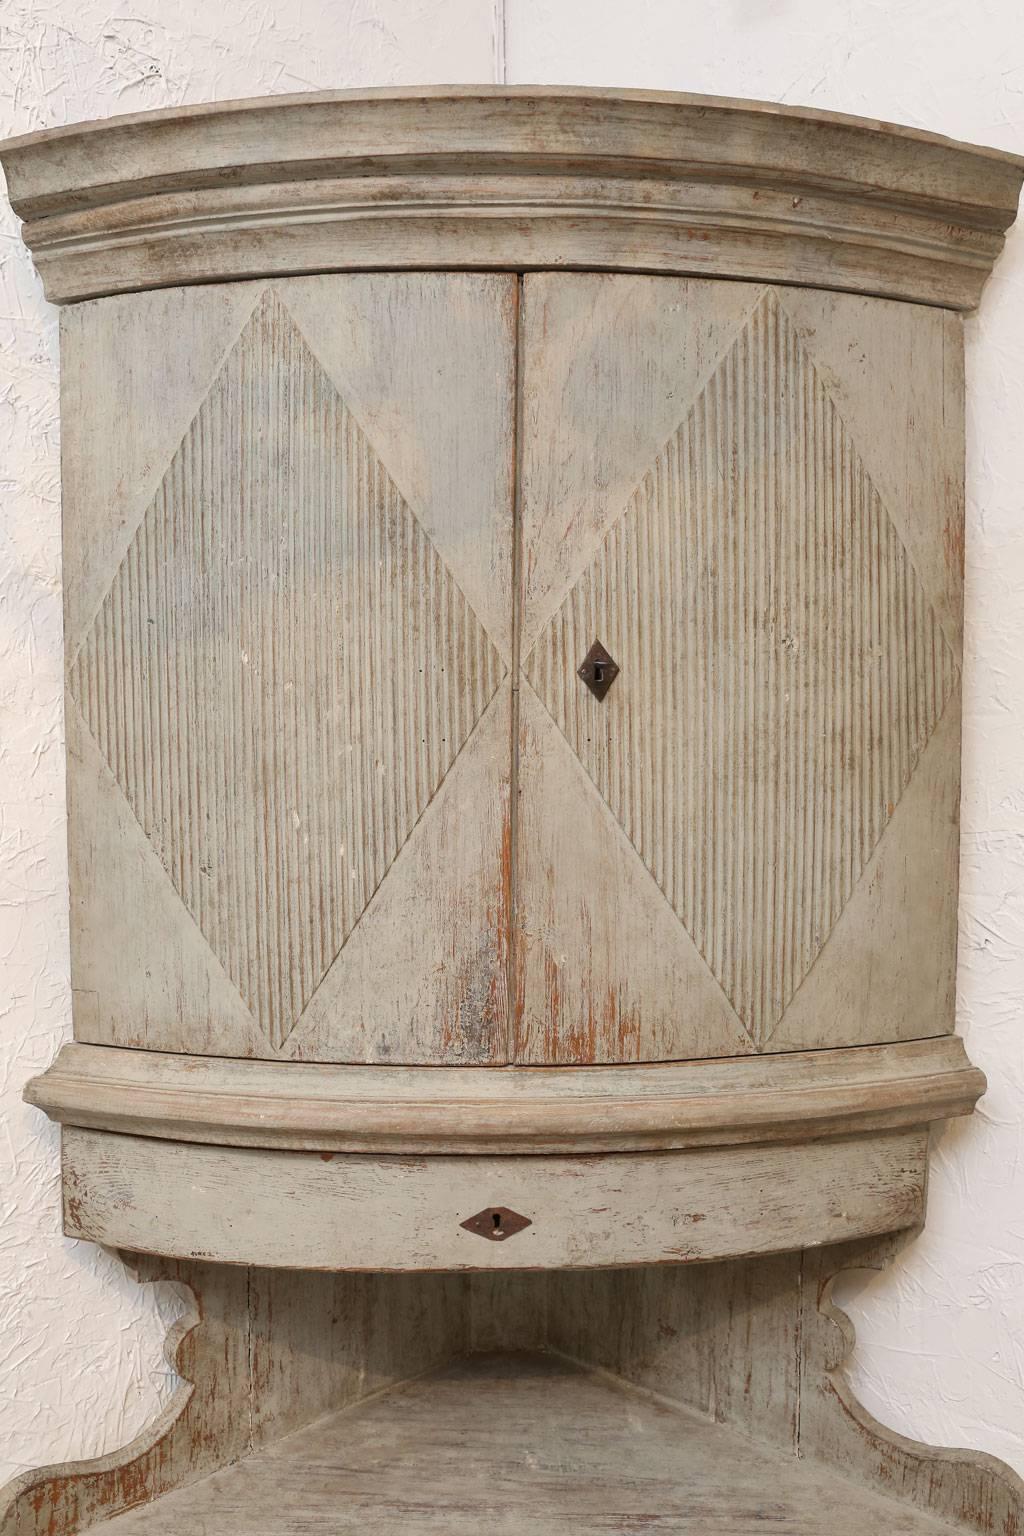 Gustavian corner cabinet from Sweden. The gray-green painted surface of this cupboard bears evidence of hand-planning and 18th century Provincial craftsmanship. It features a carved cornice, middle shelf, upper and lower convex double doors and a